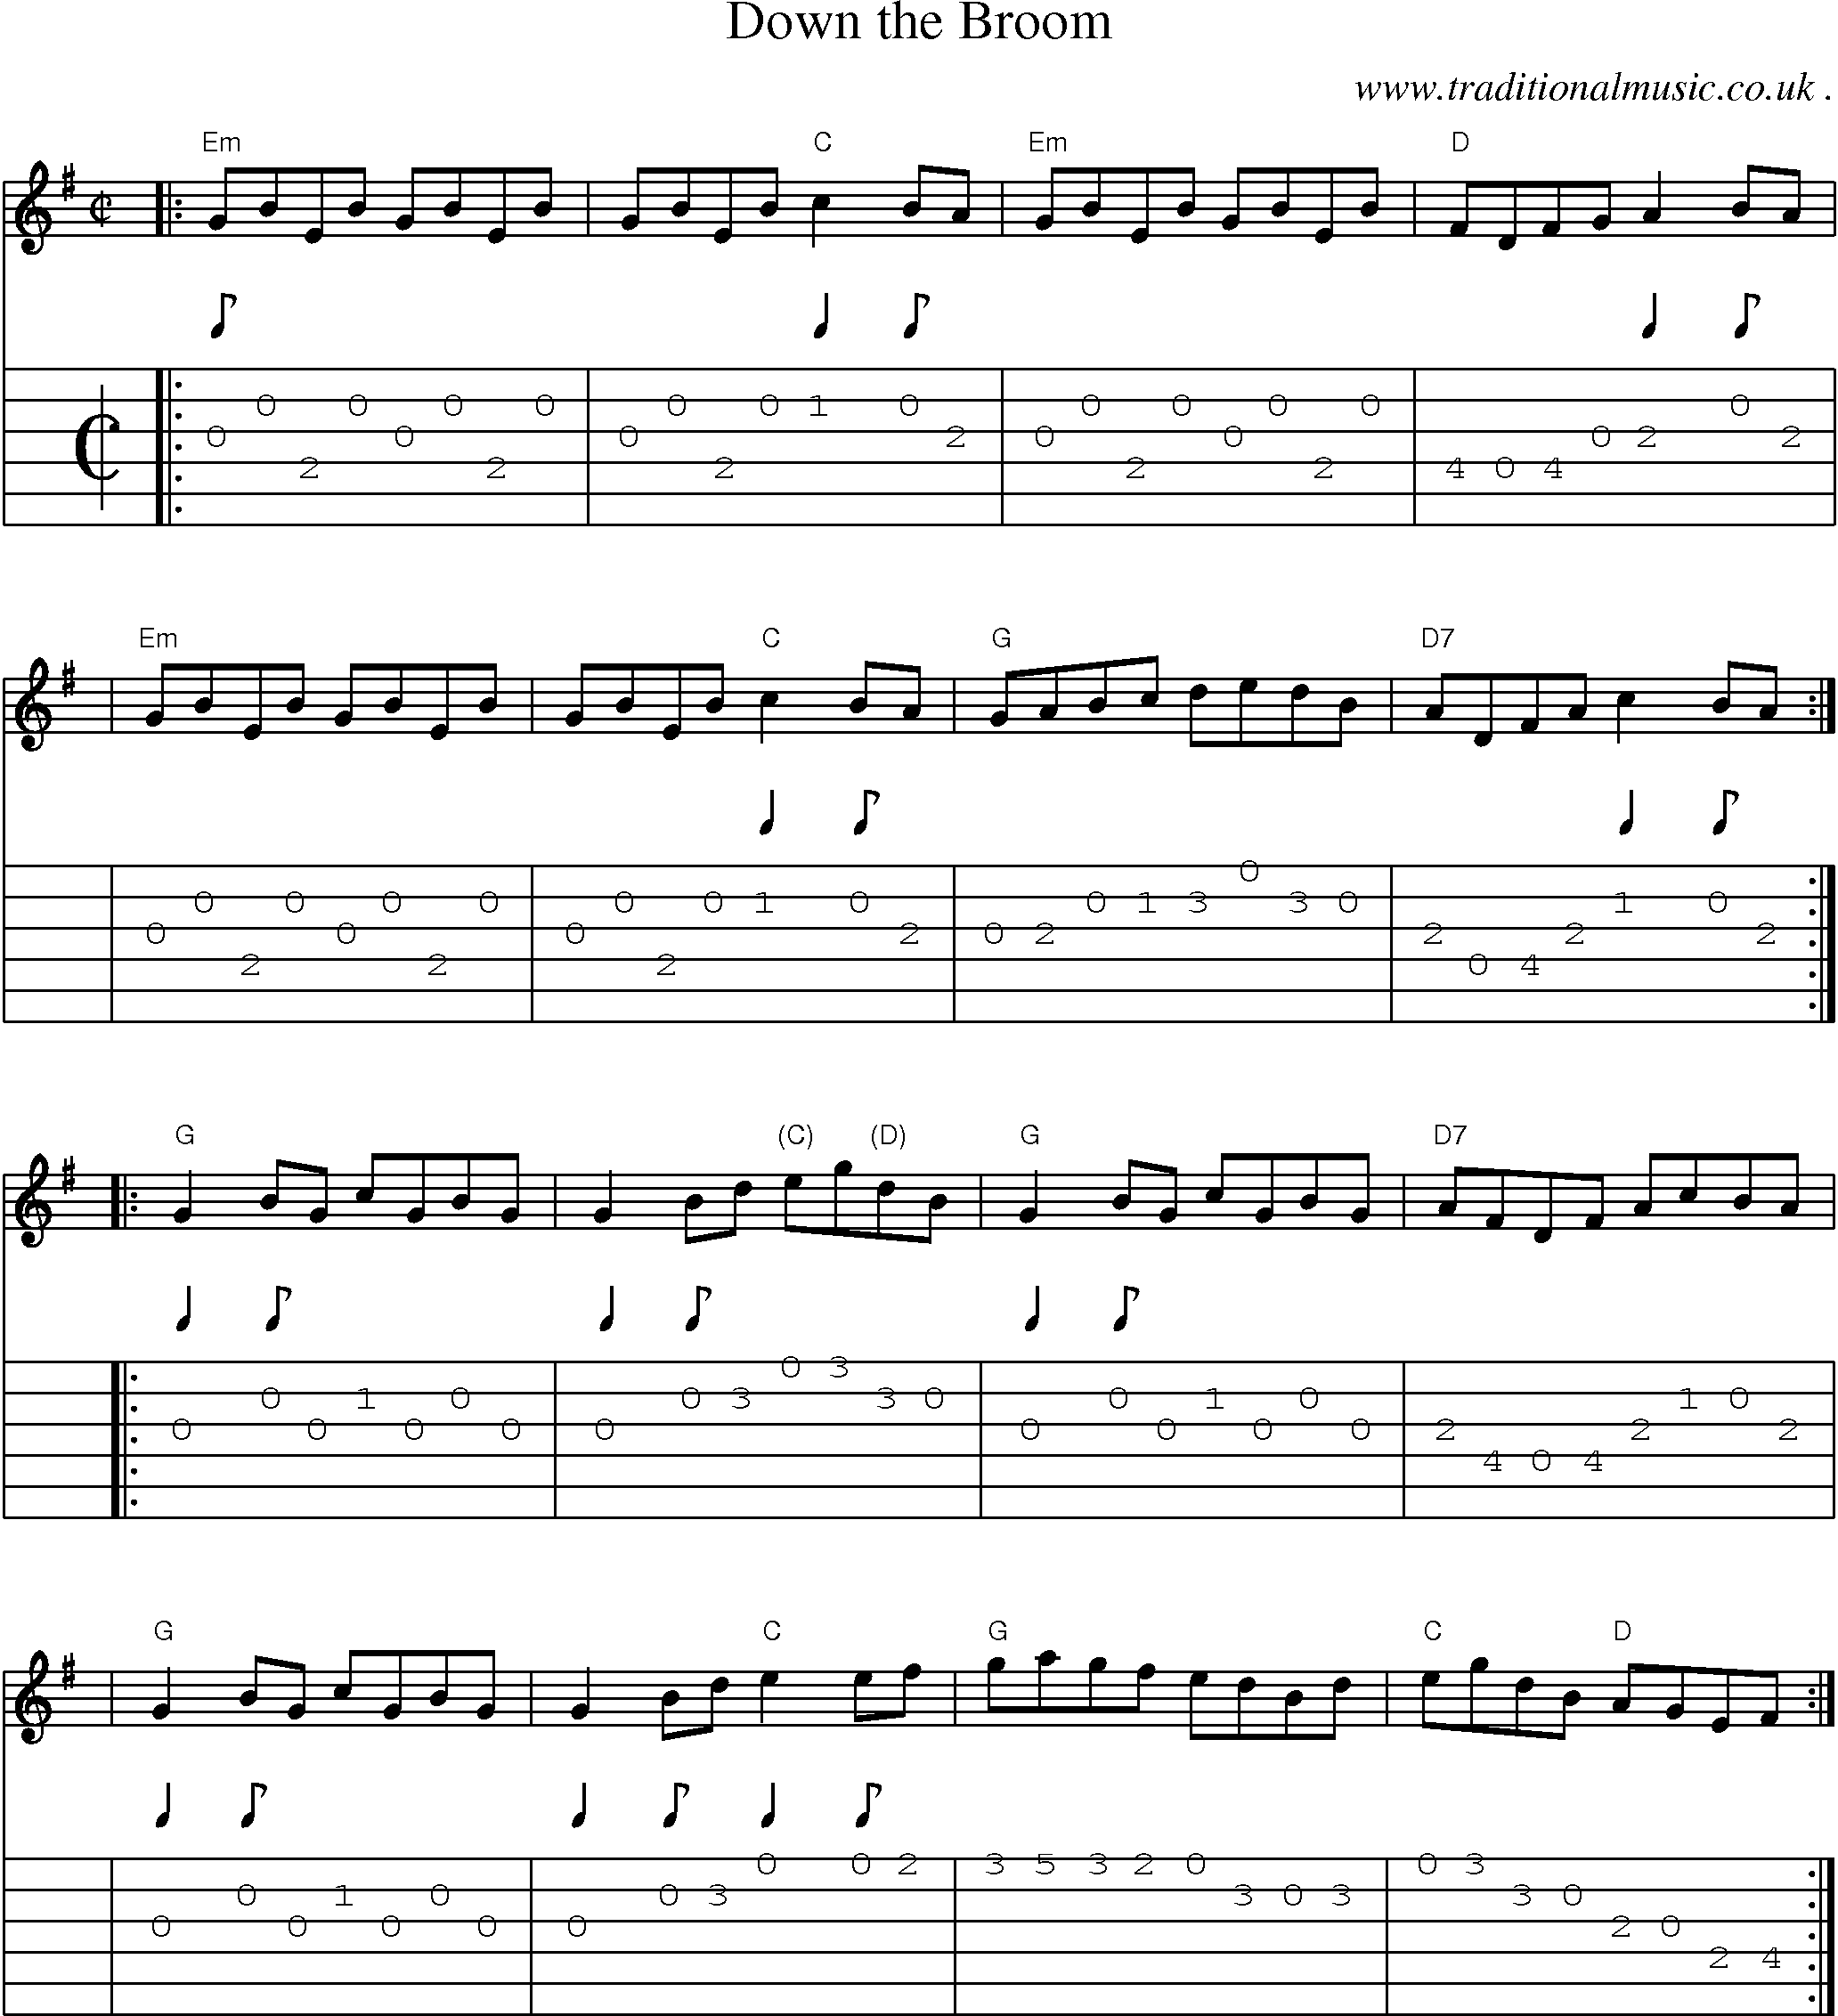 Sheet-music  score, Chords and Guitar Tabs for Down The Broom